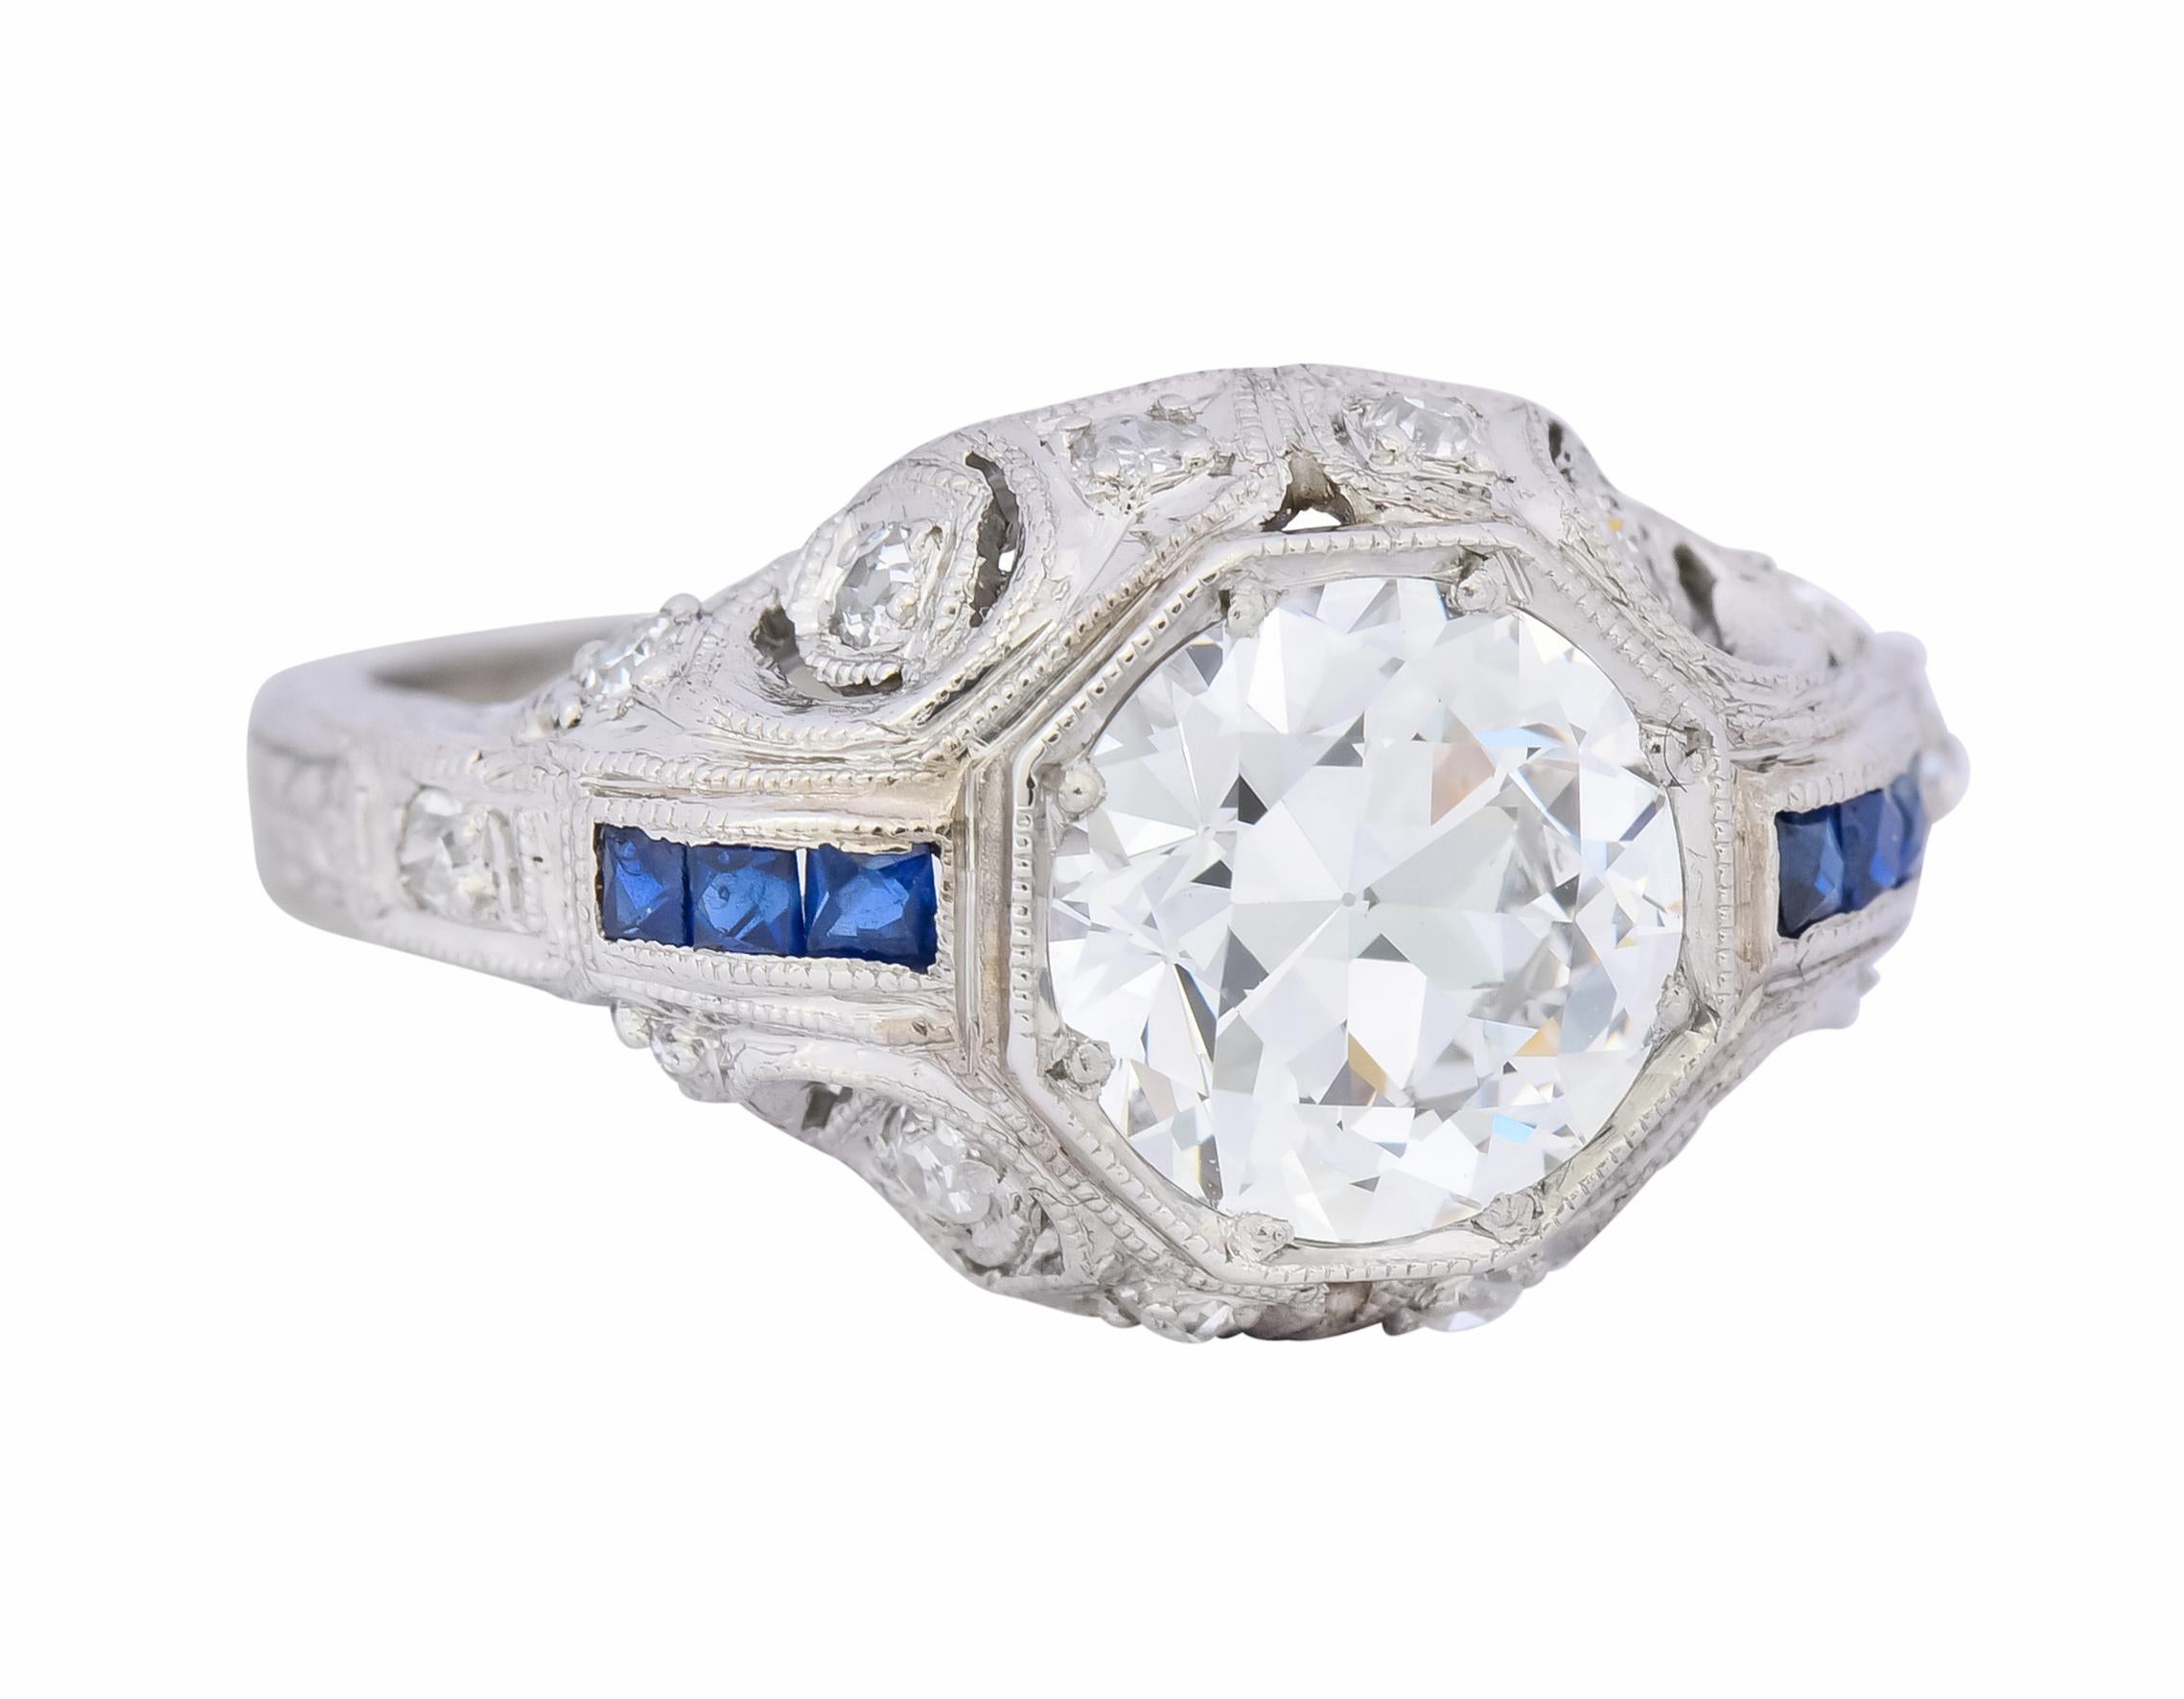 Centering a transitional cut diamond weighing 1.50 carat, F color and SI1 clarity

Set in a hexagonal mount flanked by channel set French cut sapphire weighing 0.15 carat total, dark royal blue in color

Accented by single cut diamonds weighing